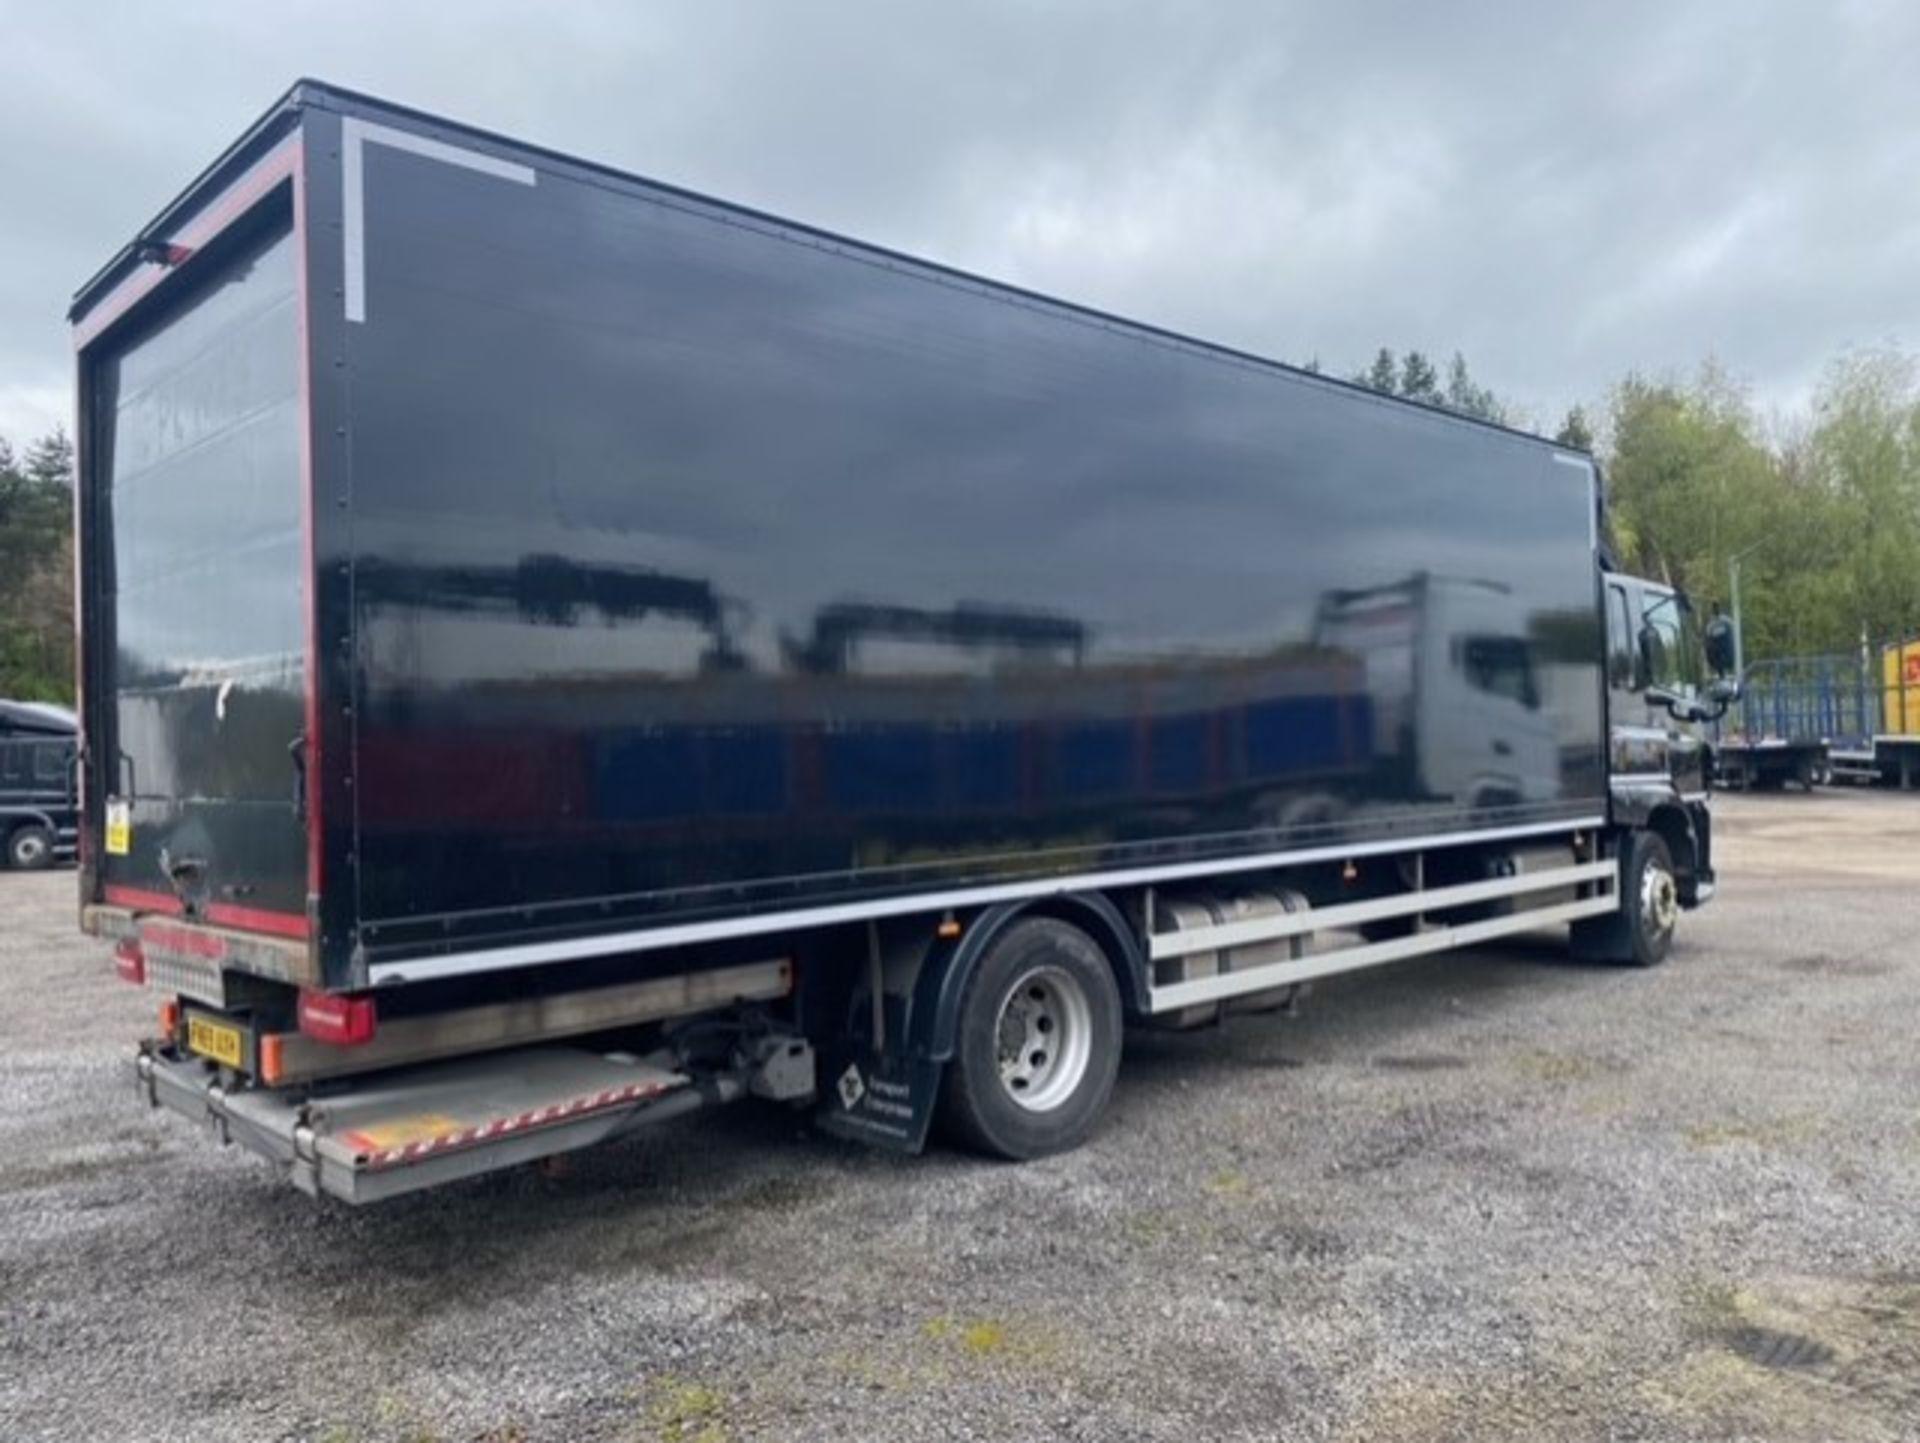 2019, DAF CF 260 FA - FN69 AXH (18 Ton Rigid Truck with Tail Lift) - Image 19 of 22